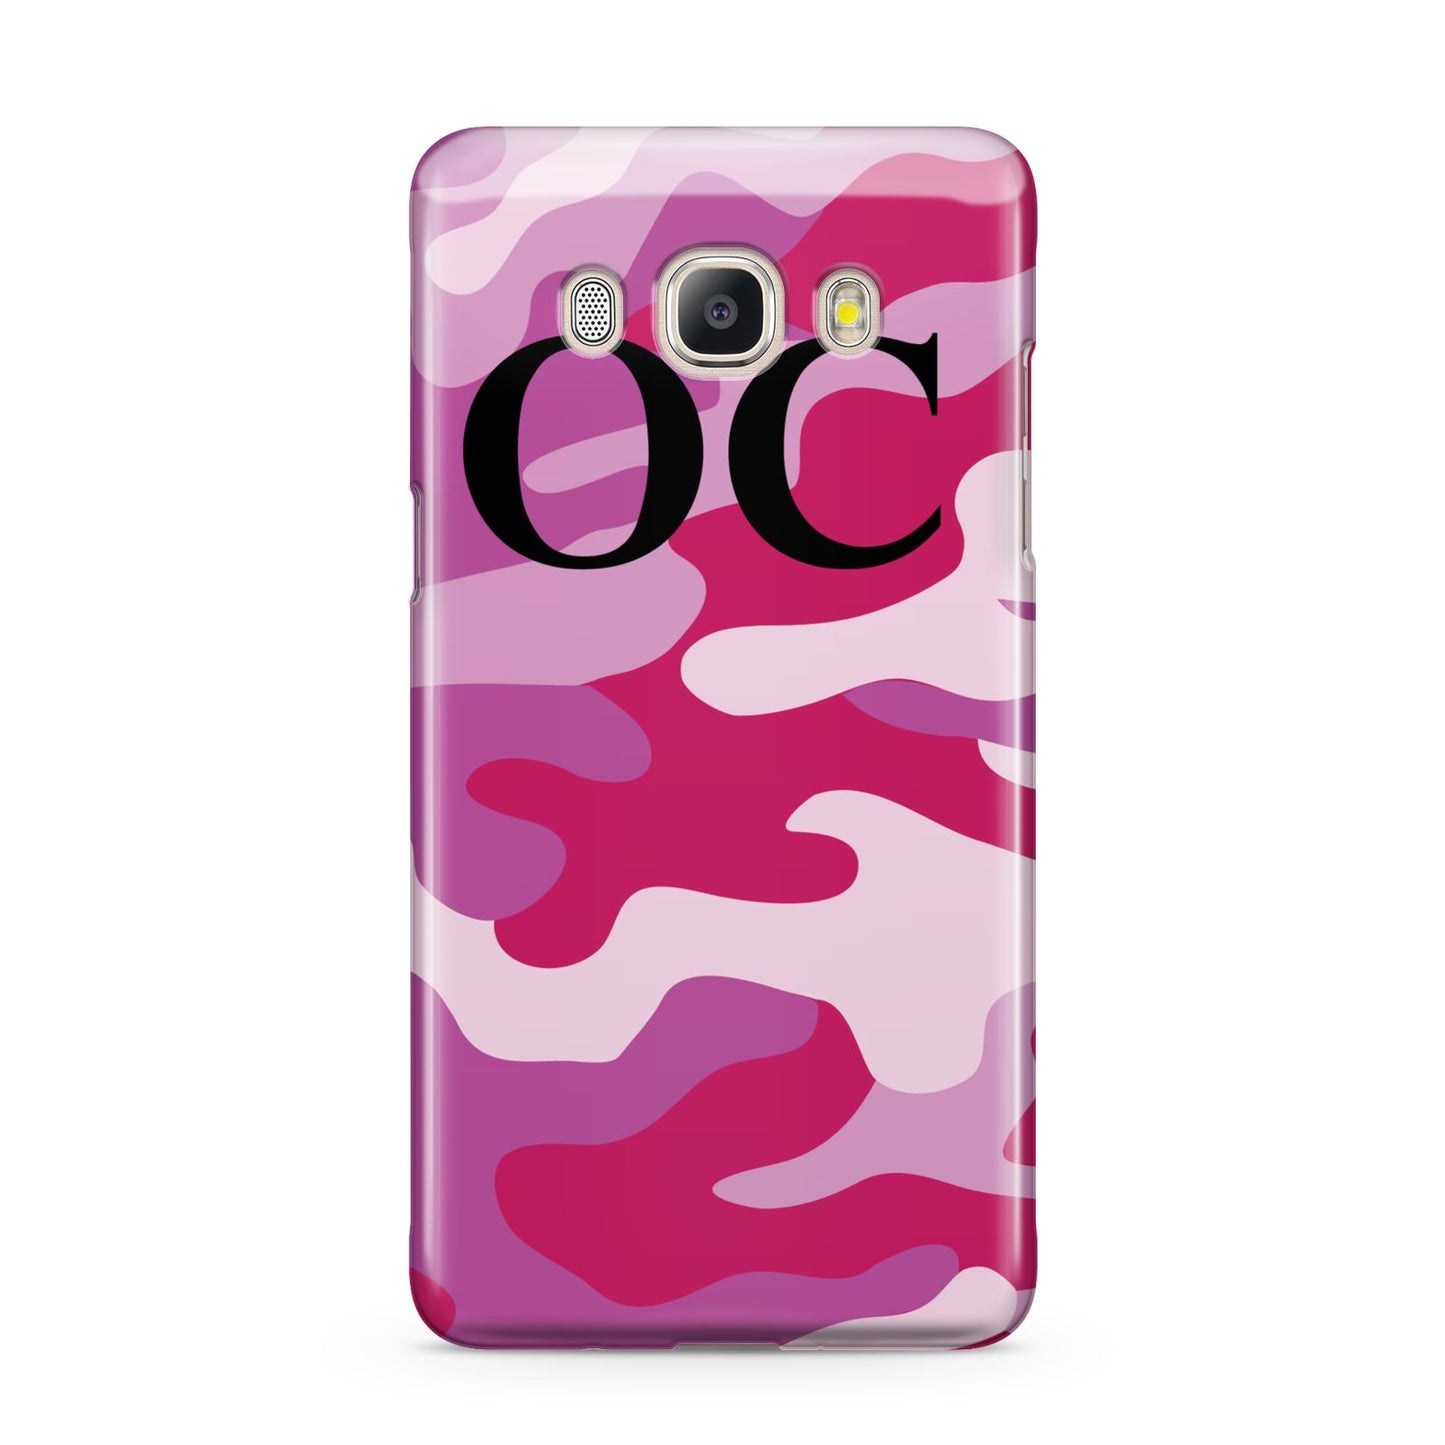 Camouflage Personalised Samsung Galaxy J5 2016 Case